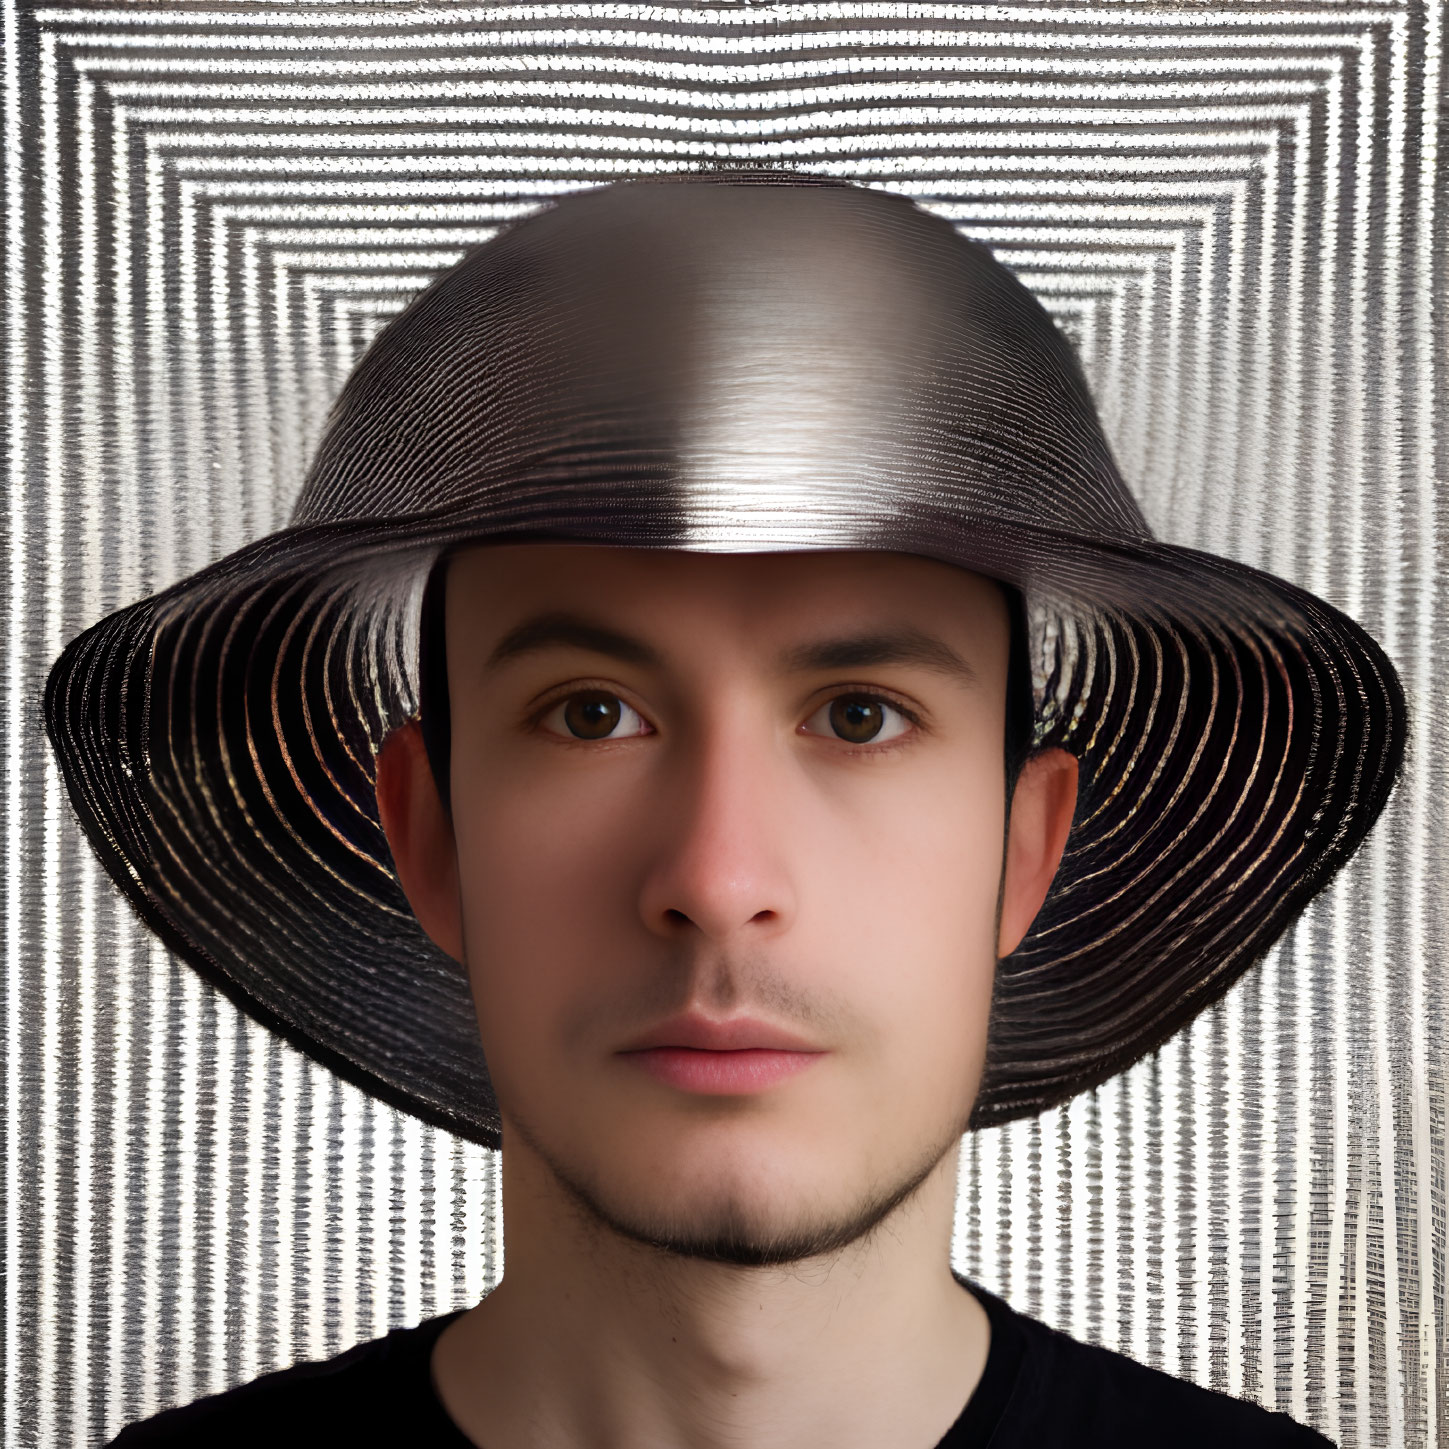 Young man in large metallic hat on hypnotic geometric backdrop